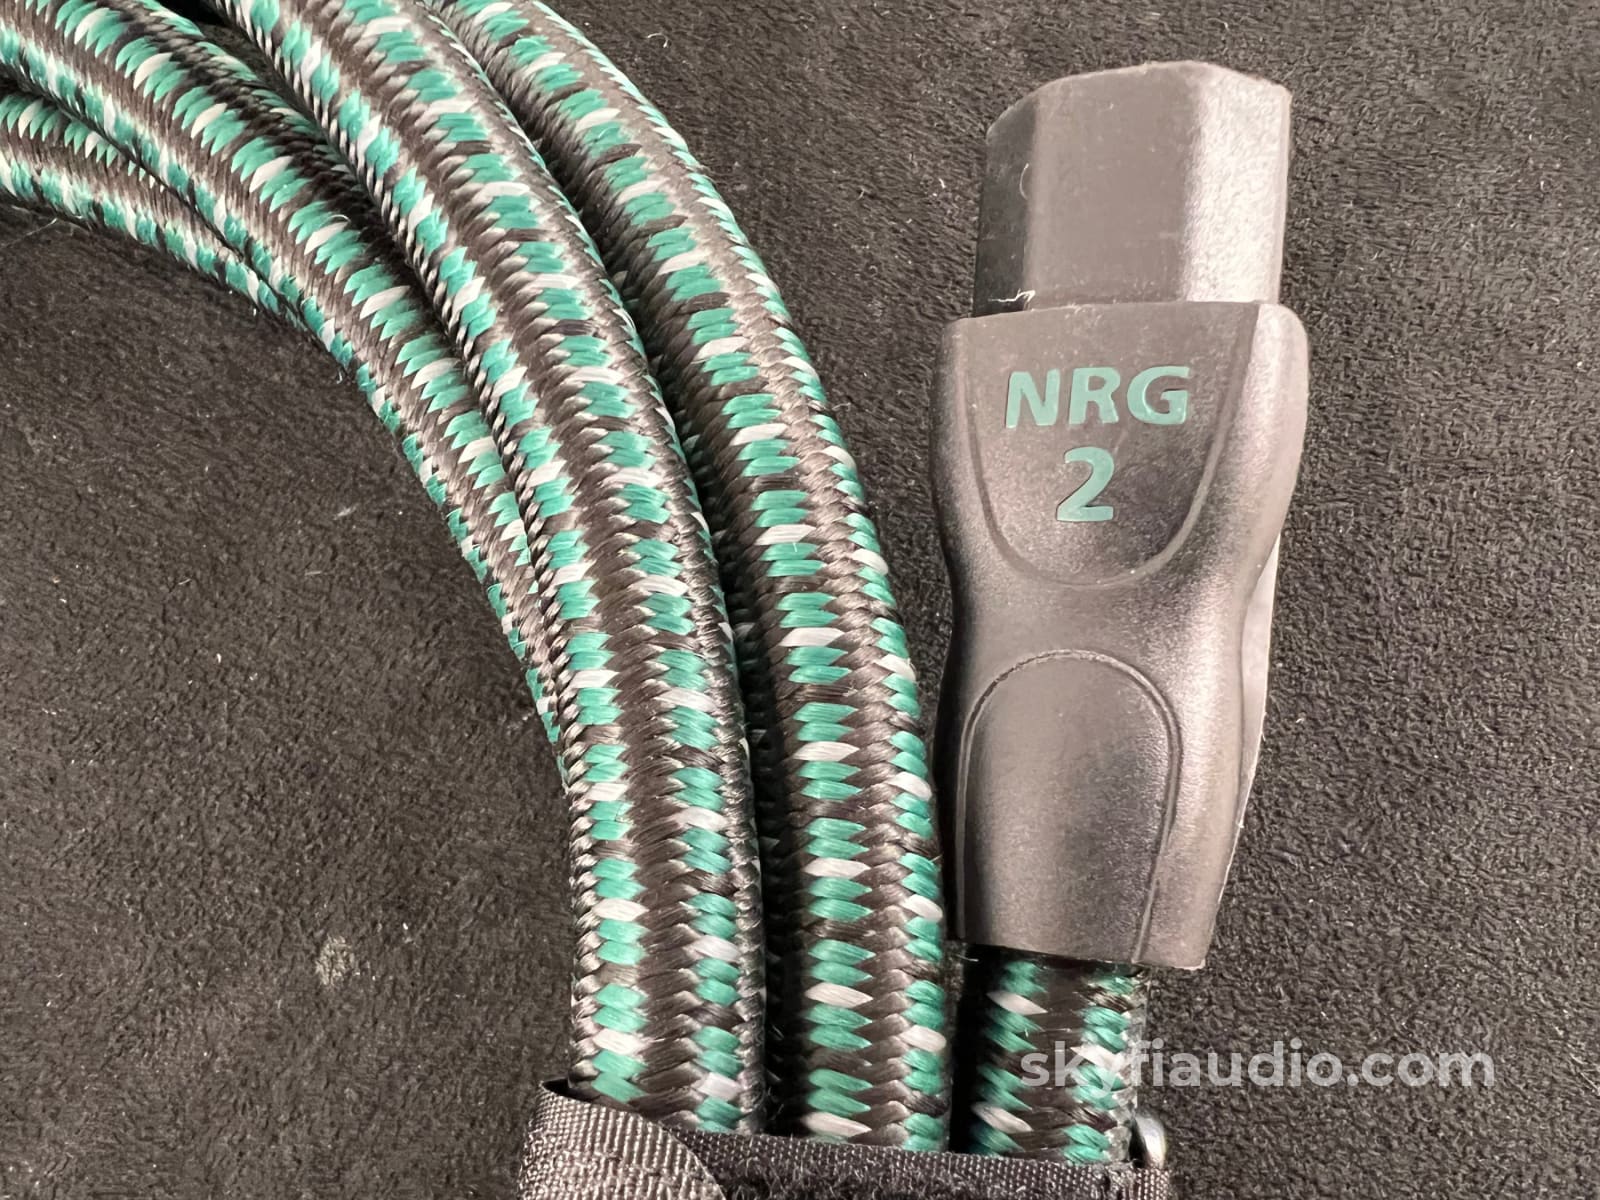 Audioquest Nrg-2 Power Cord - 3M Cables